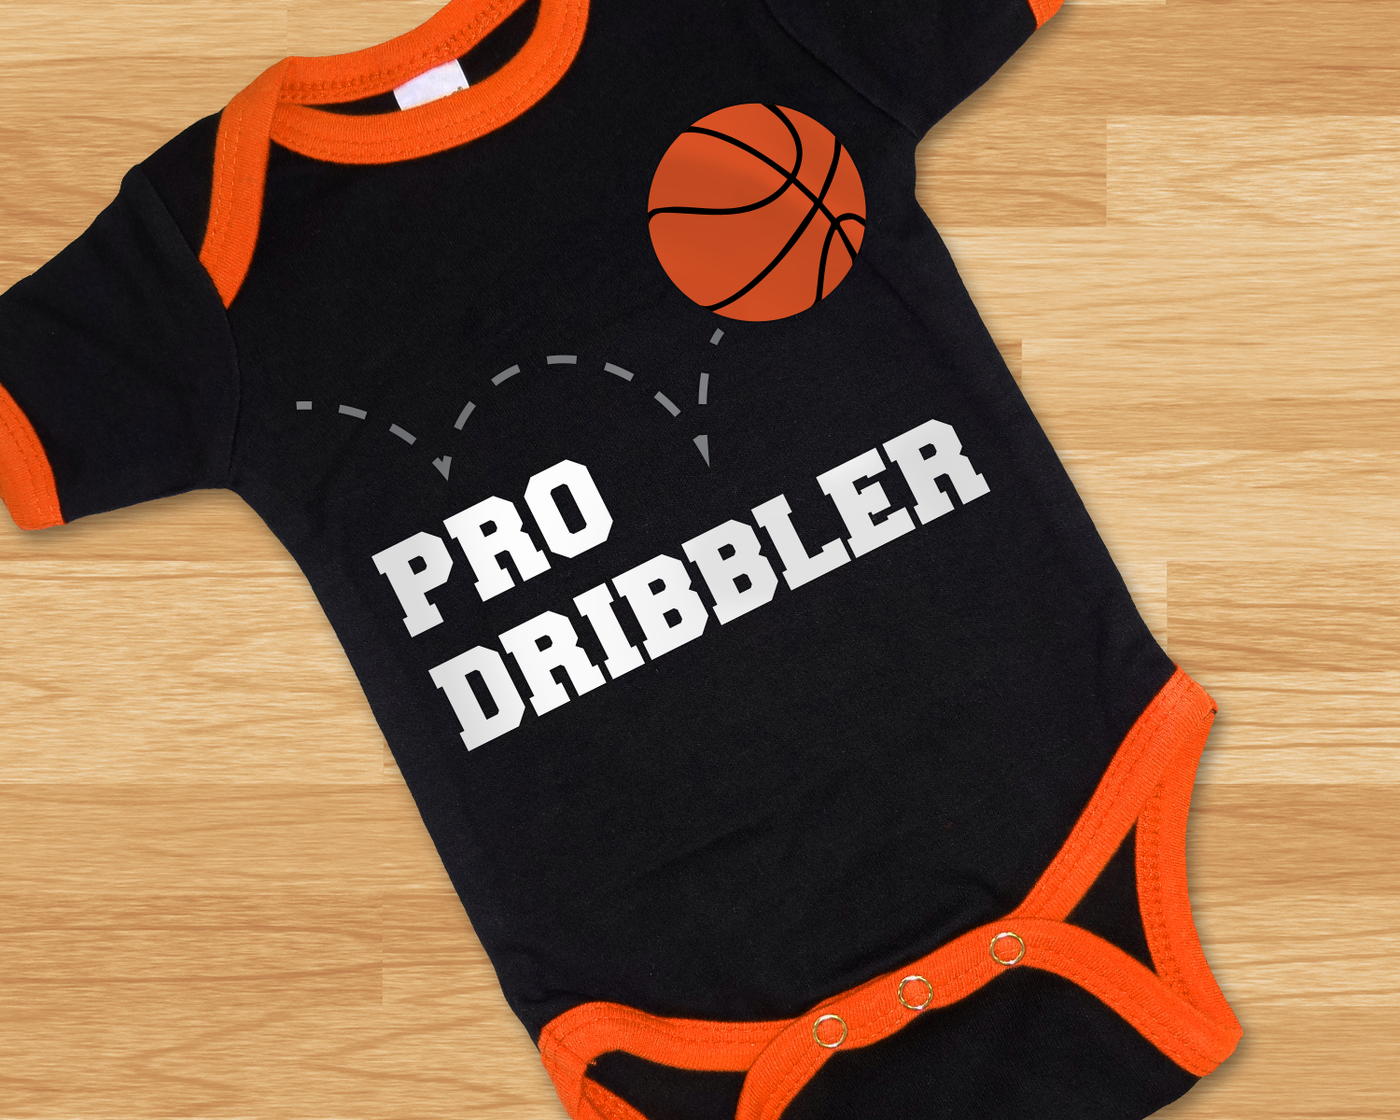 Pro dribbler design with a bouncing basketball